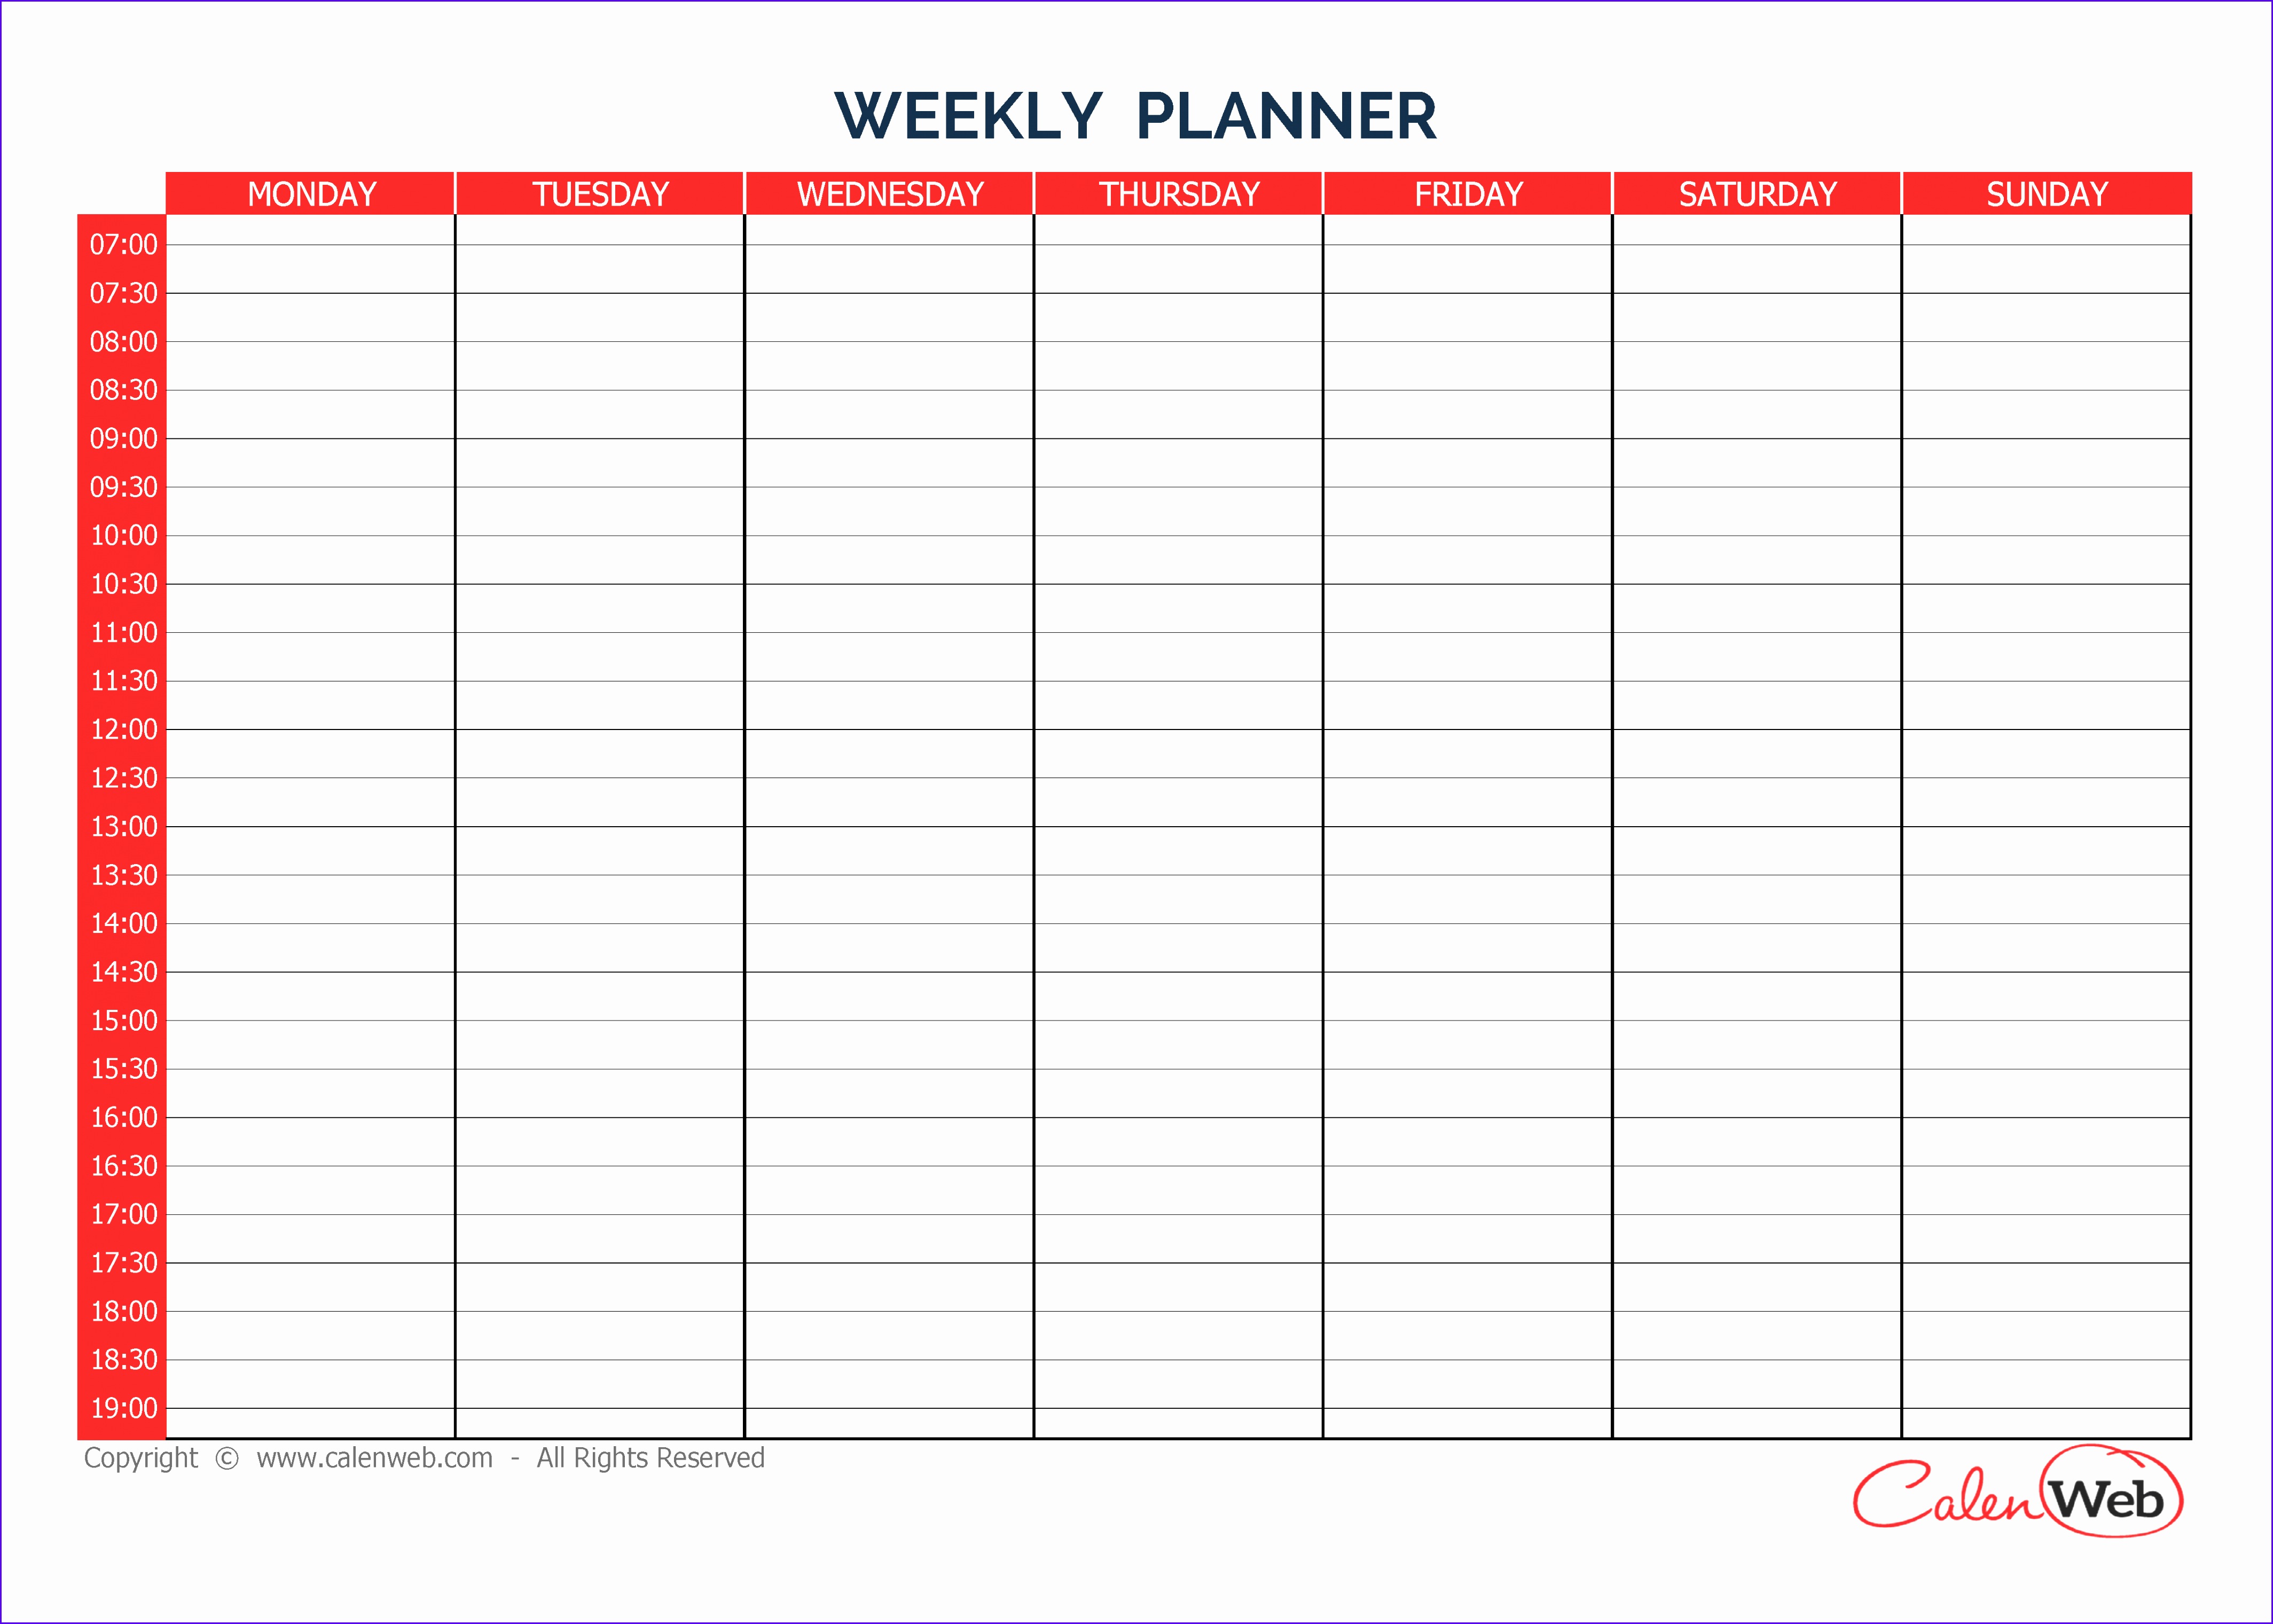 Best solutions Weekly Calendar Planner In 7 Day Diary Template